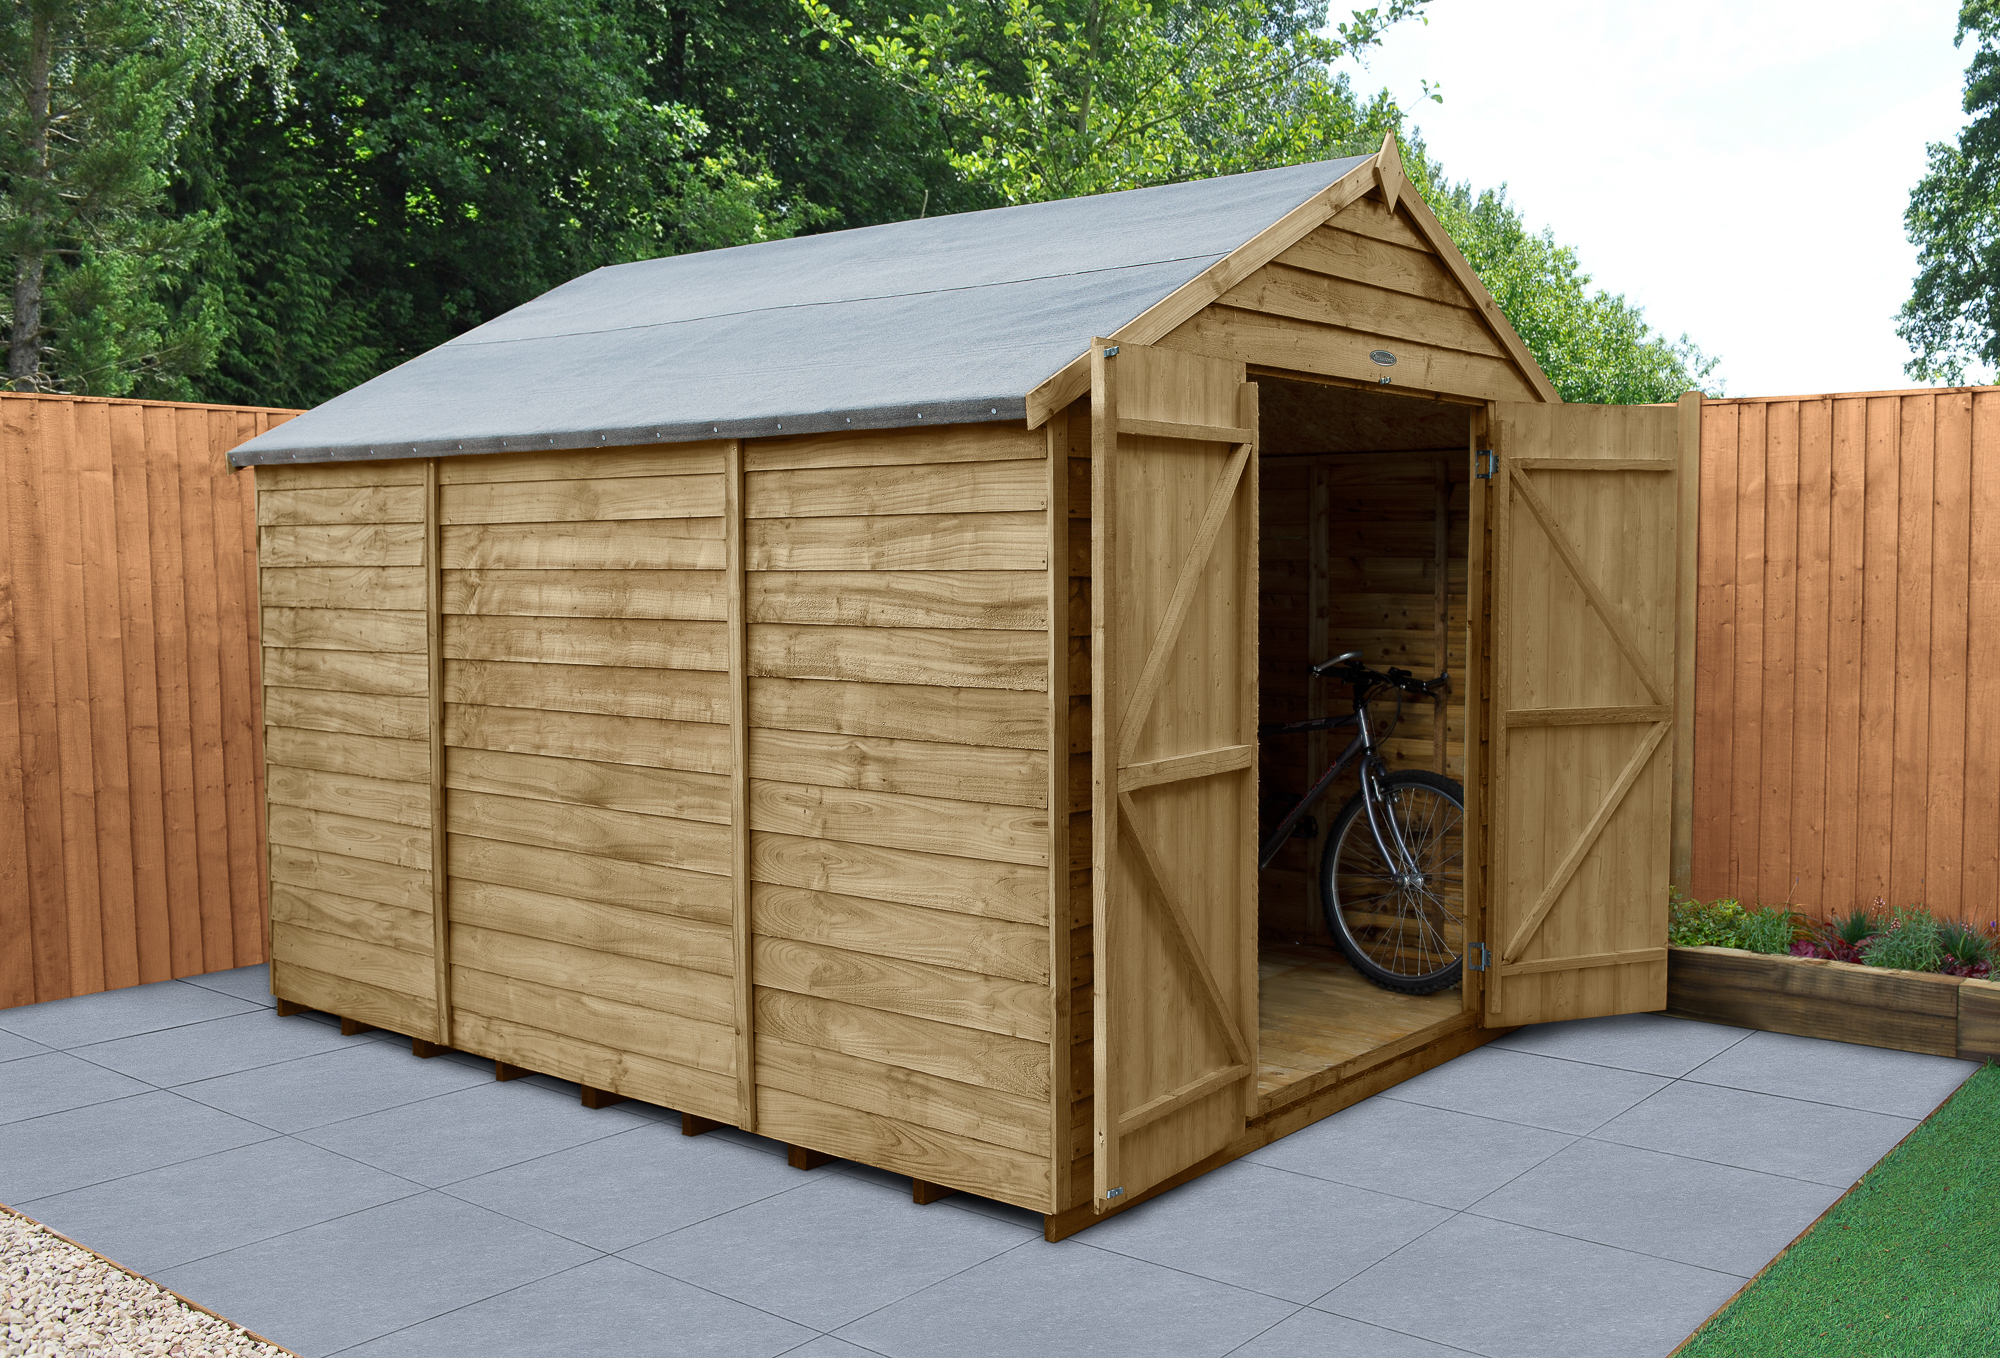 Forest Garden 8 x 10ft 4Life Apex Overlap Pressure Treated Double Door Windowless Shed with Base